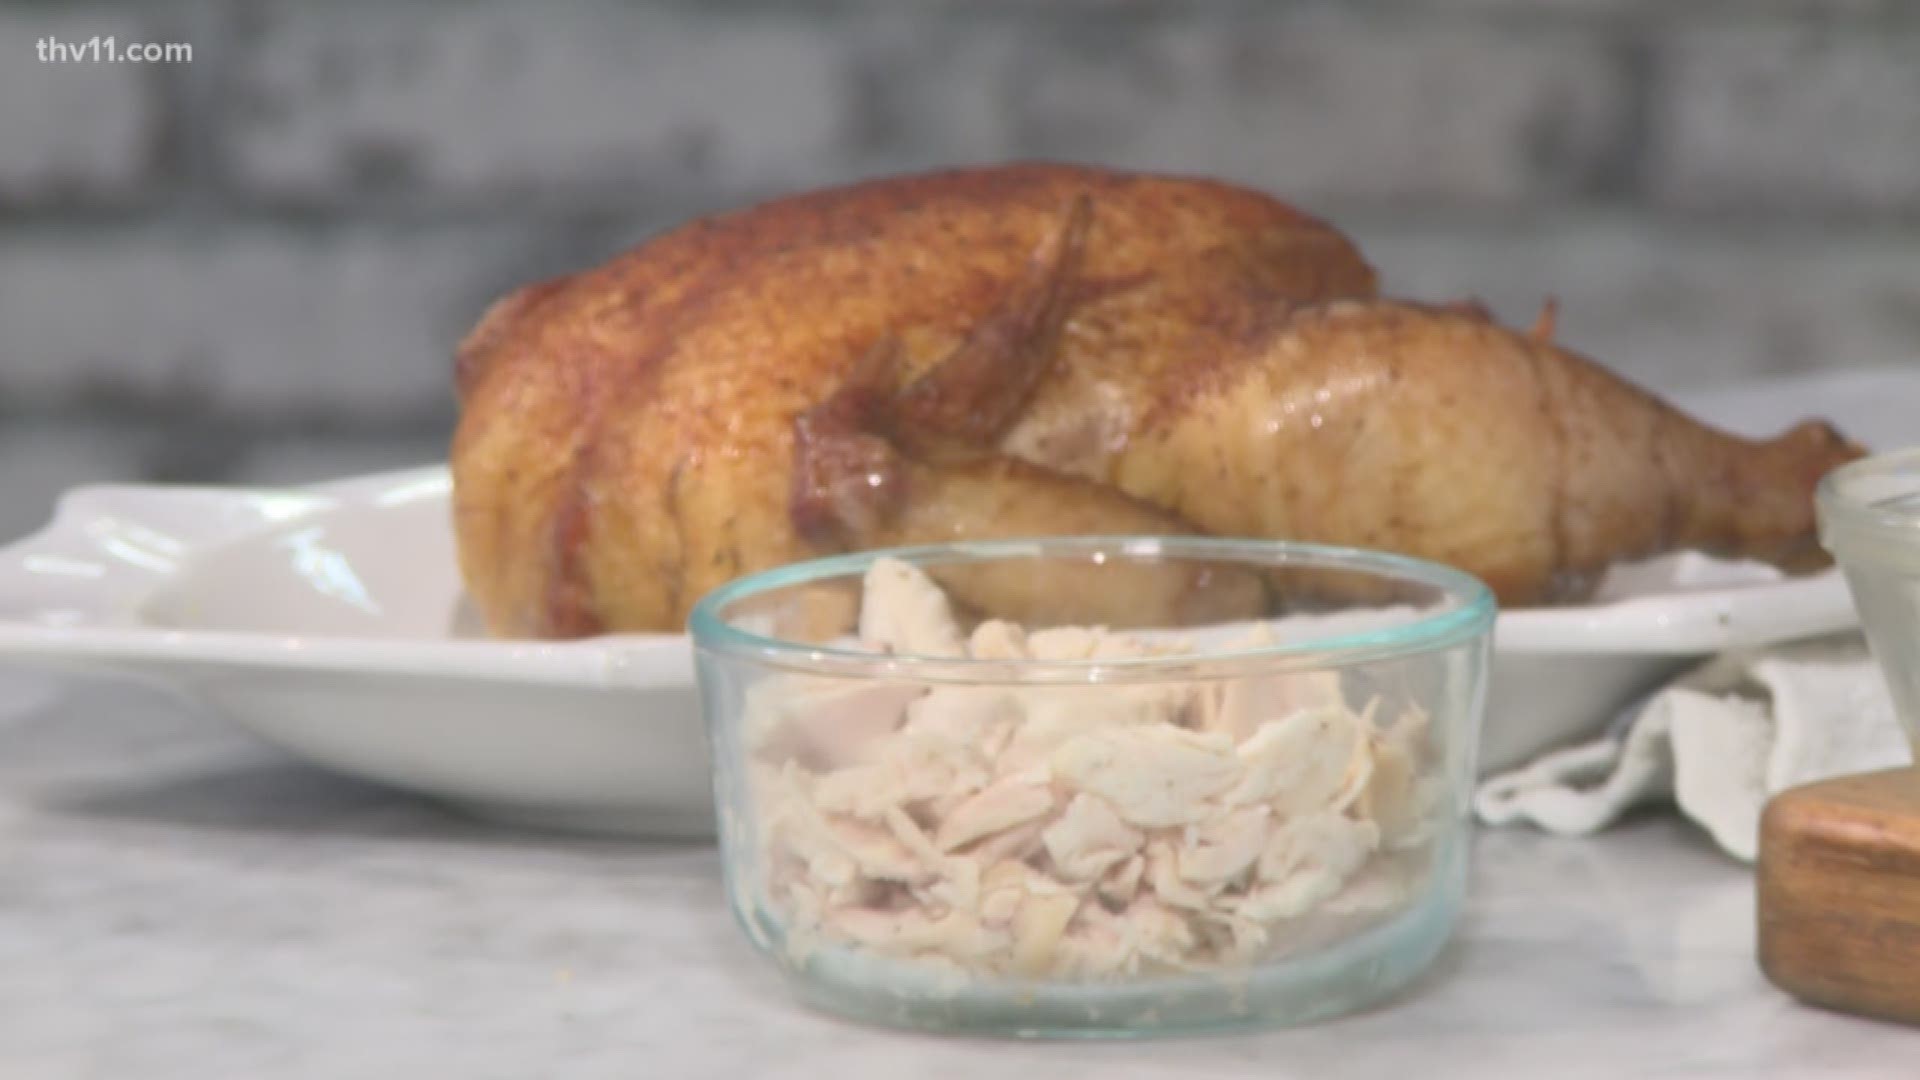 Chef Anthony Michael shows us how to make smoked chicken salad.